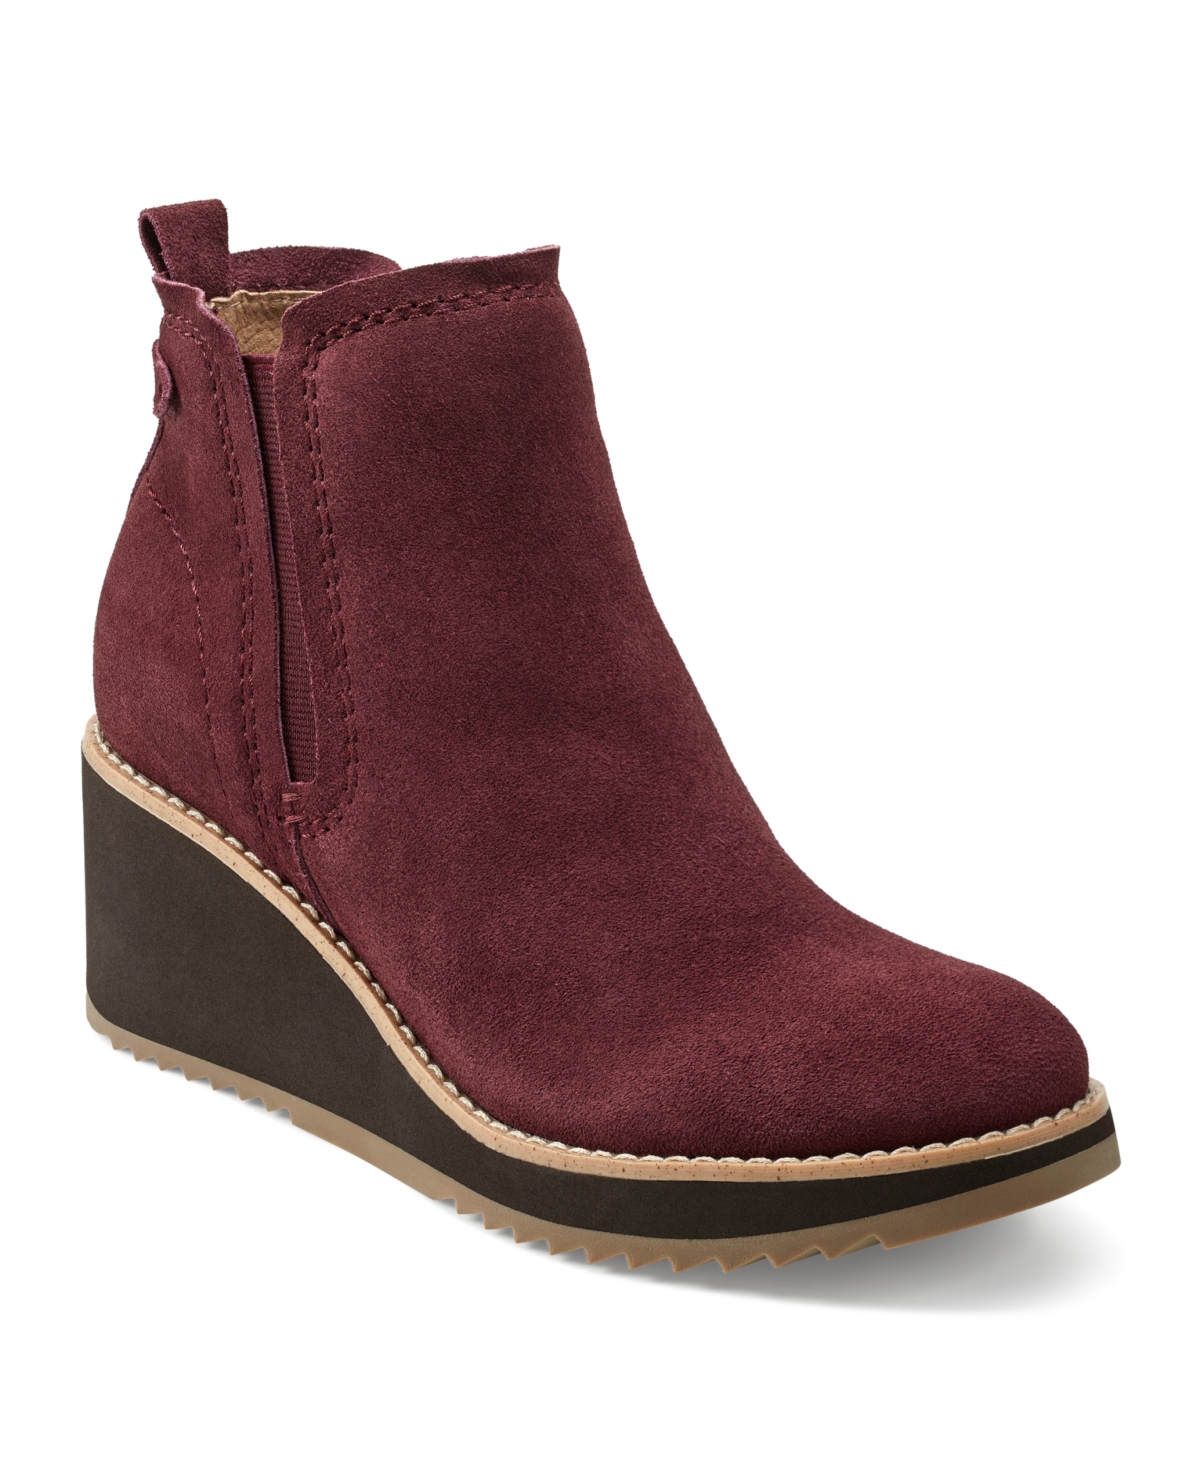 Earth Women's Cleia Slip-On Round Toe Casual Wedge Booties - Dark Red Suede